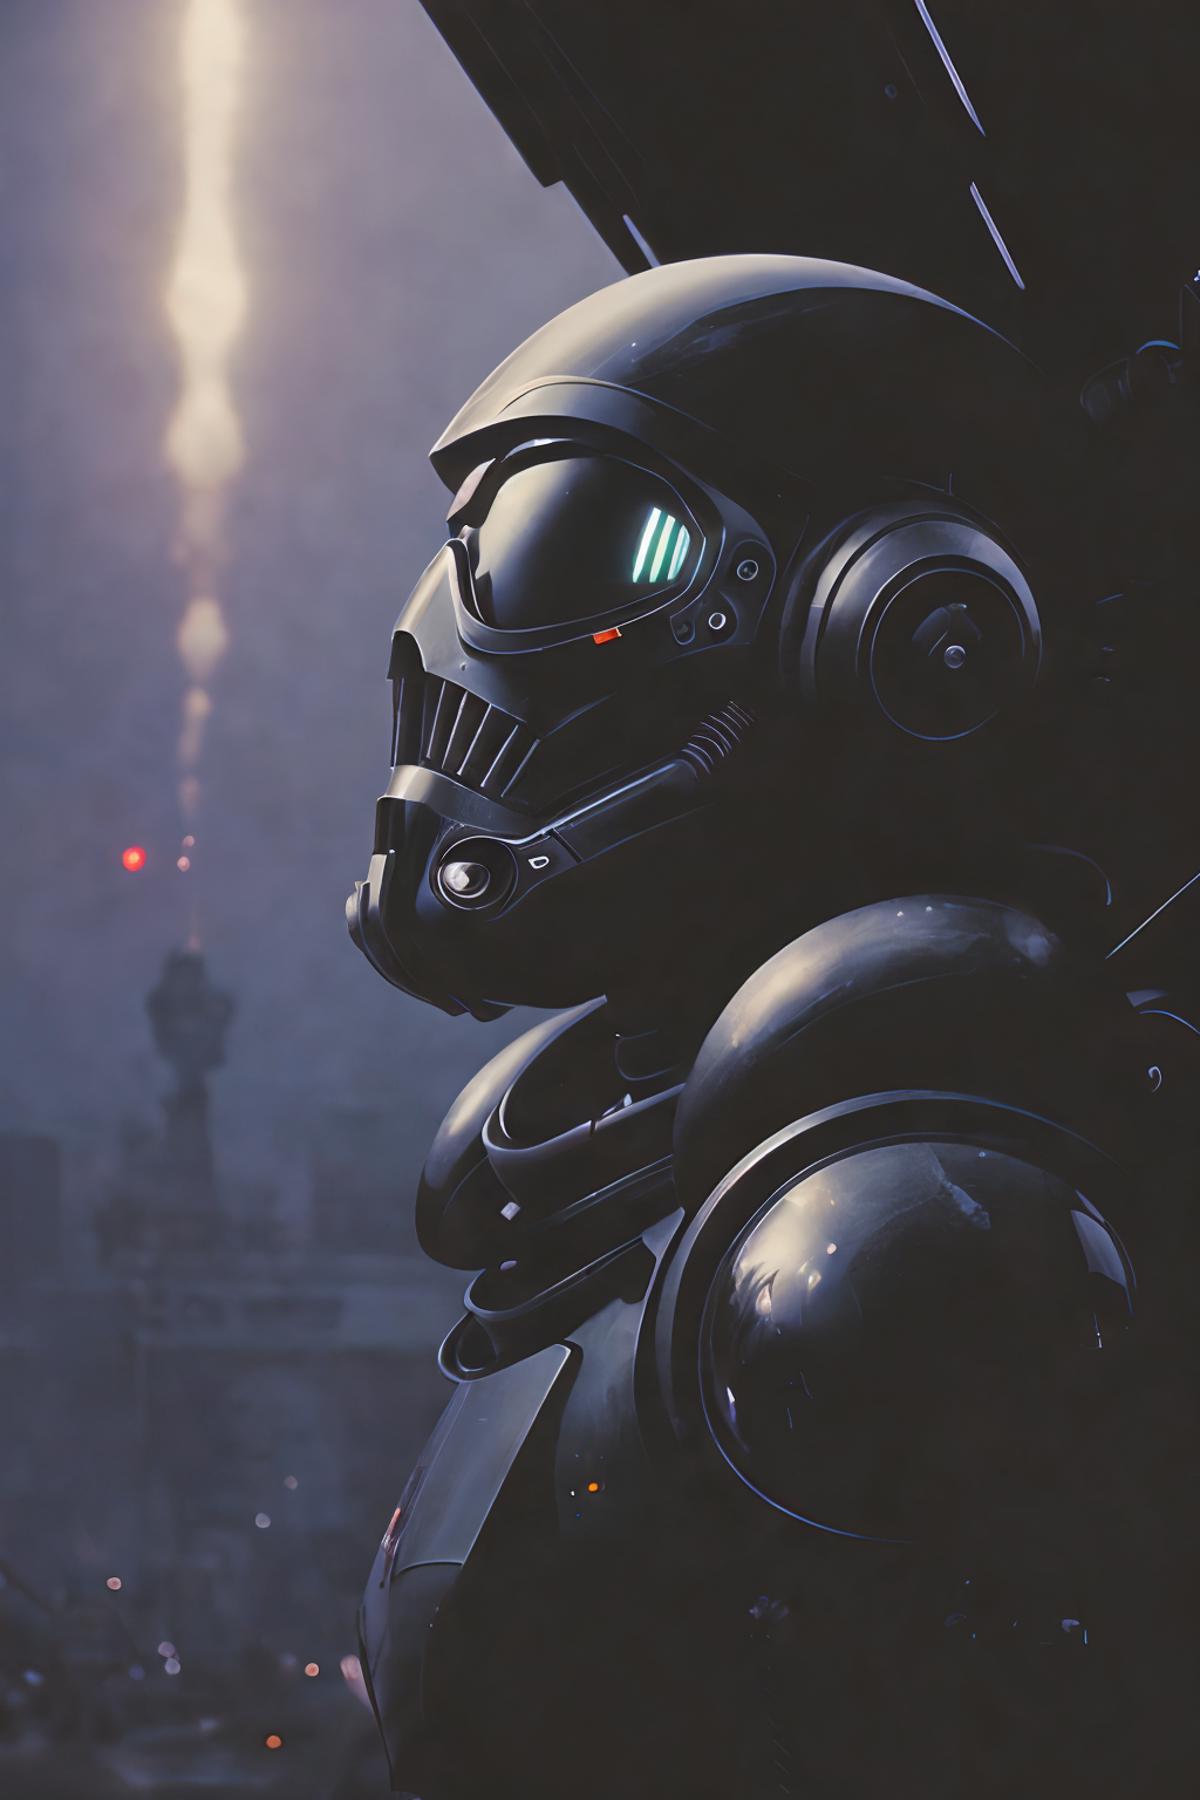 A robot with a helmet and headphones on, looking into the distance.